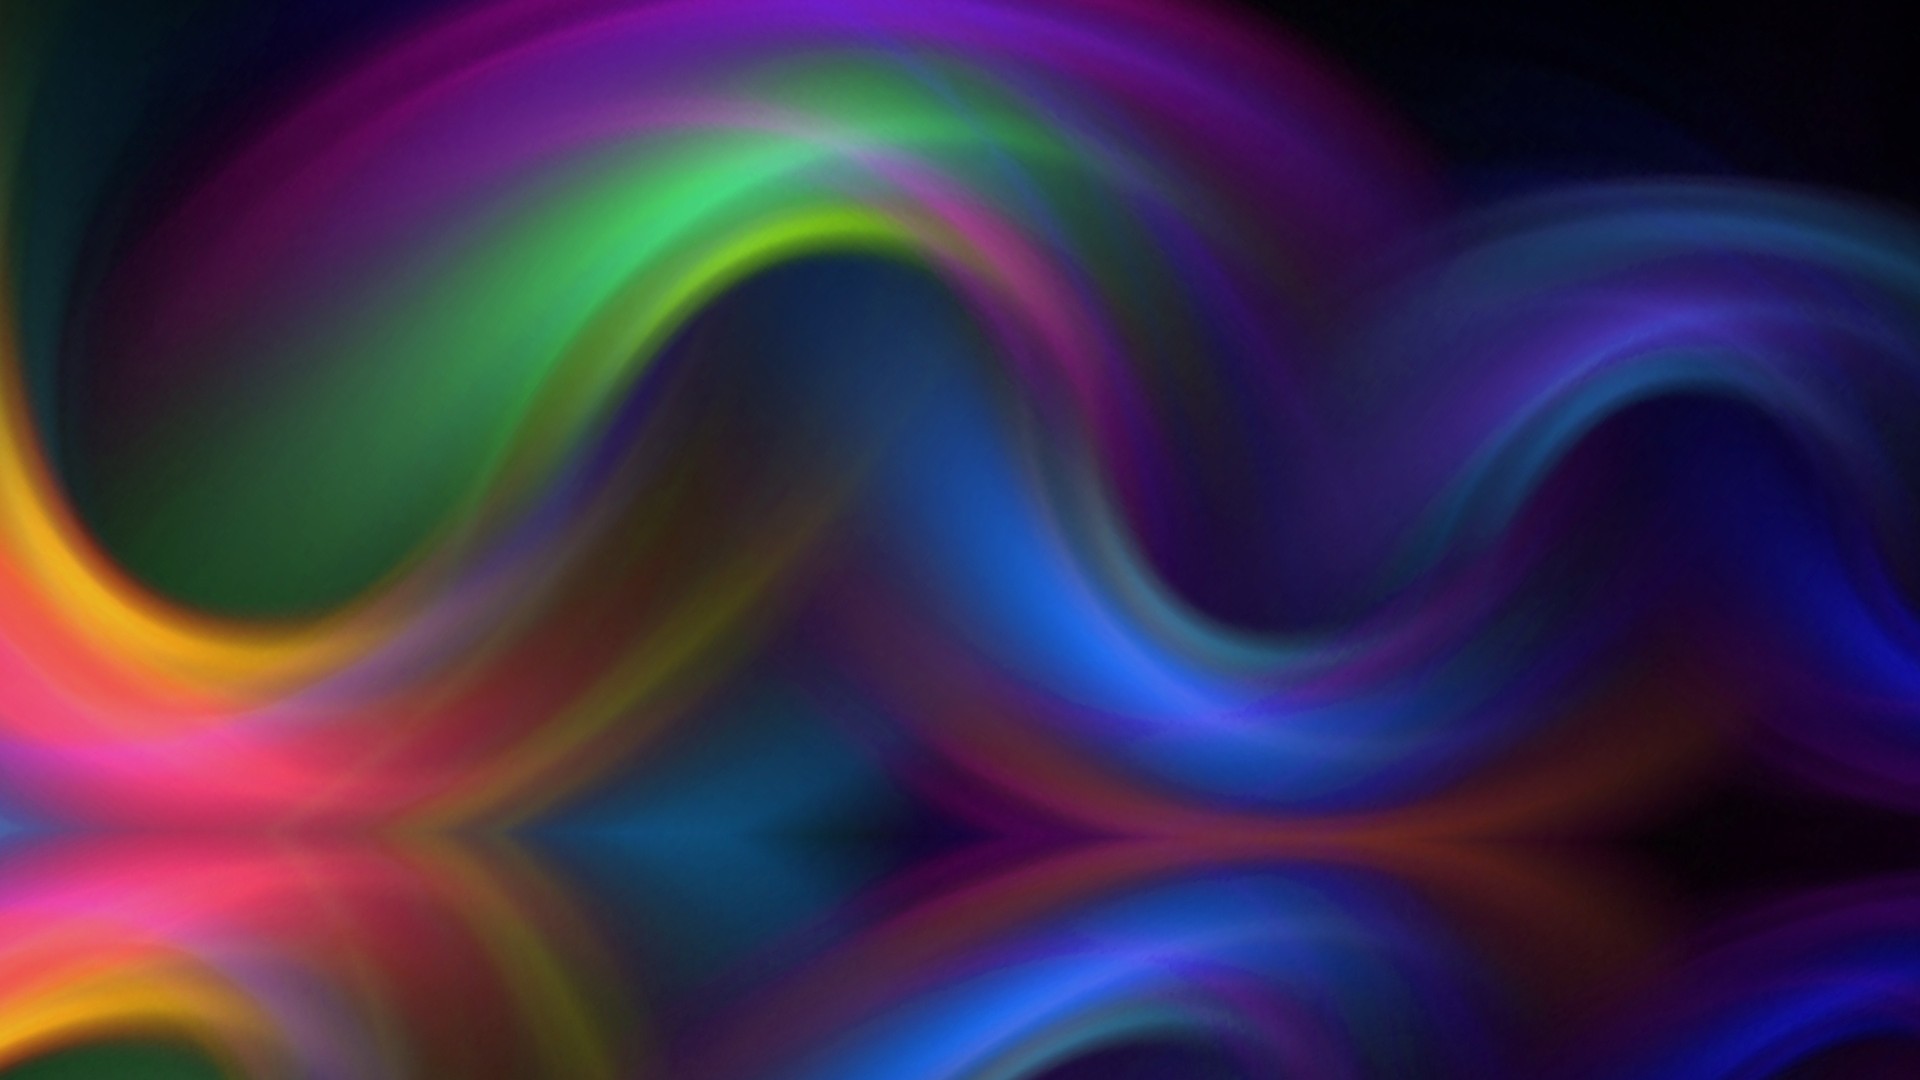 Best Dark Colorful Wallpaper with high-resolution 1920x1080 pixel. You can use this wallpaper for your Windows and Mac OS computers as well as your Android and iPhone smartphones